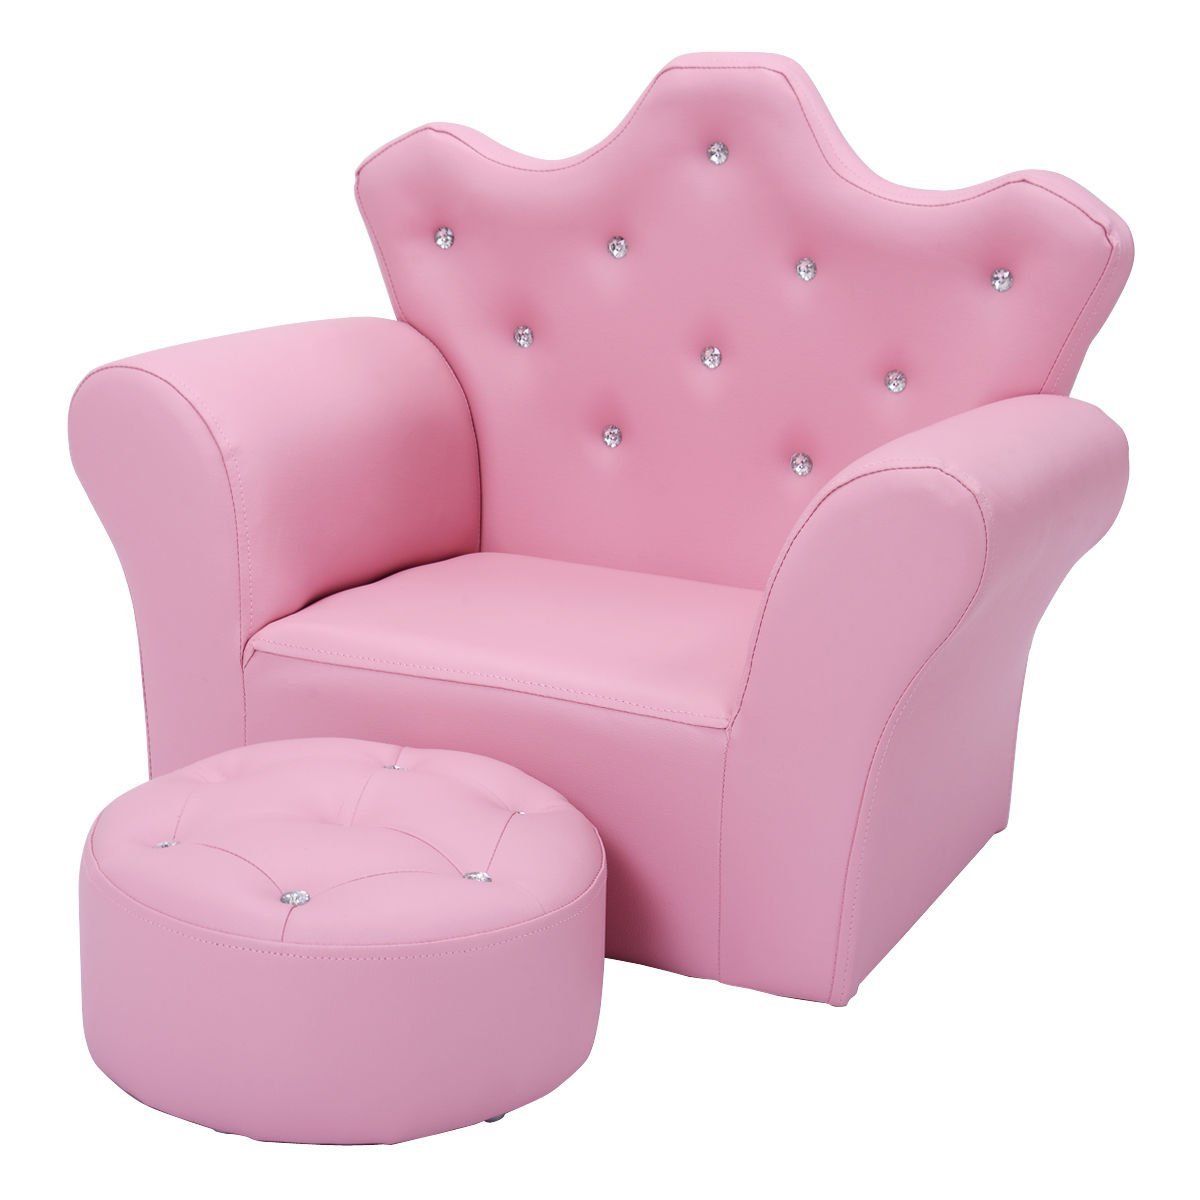 Sofa Chair With Ottoman Within Most Popular Buy Princess Ottoman Sofa – Furniture (View 6 of 20)